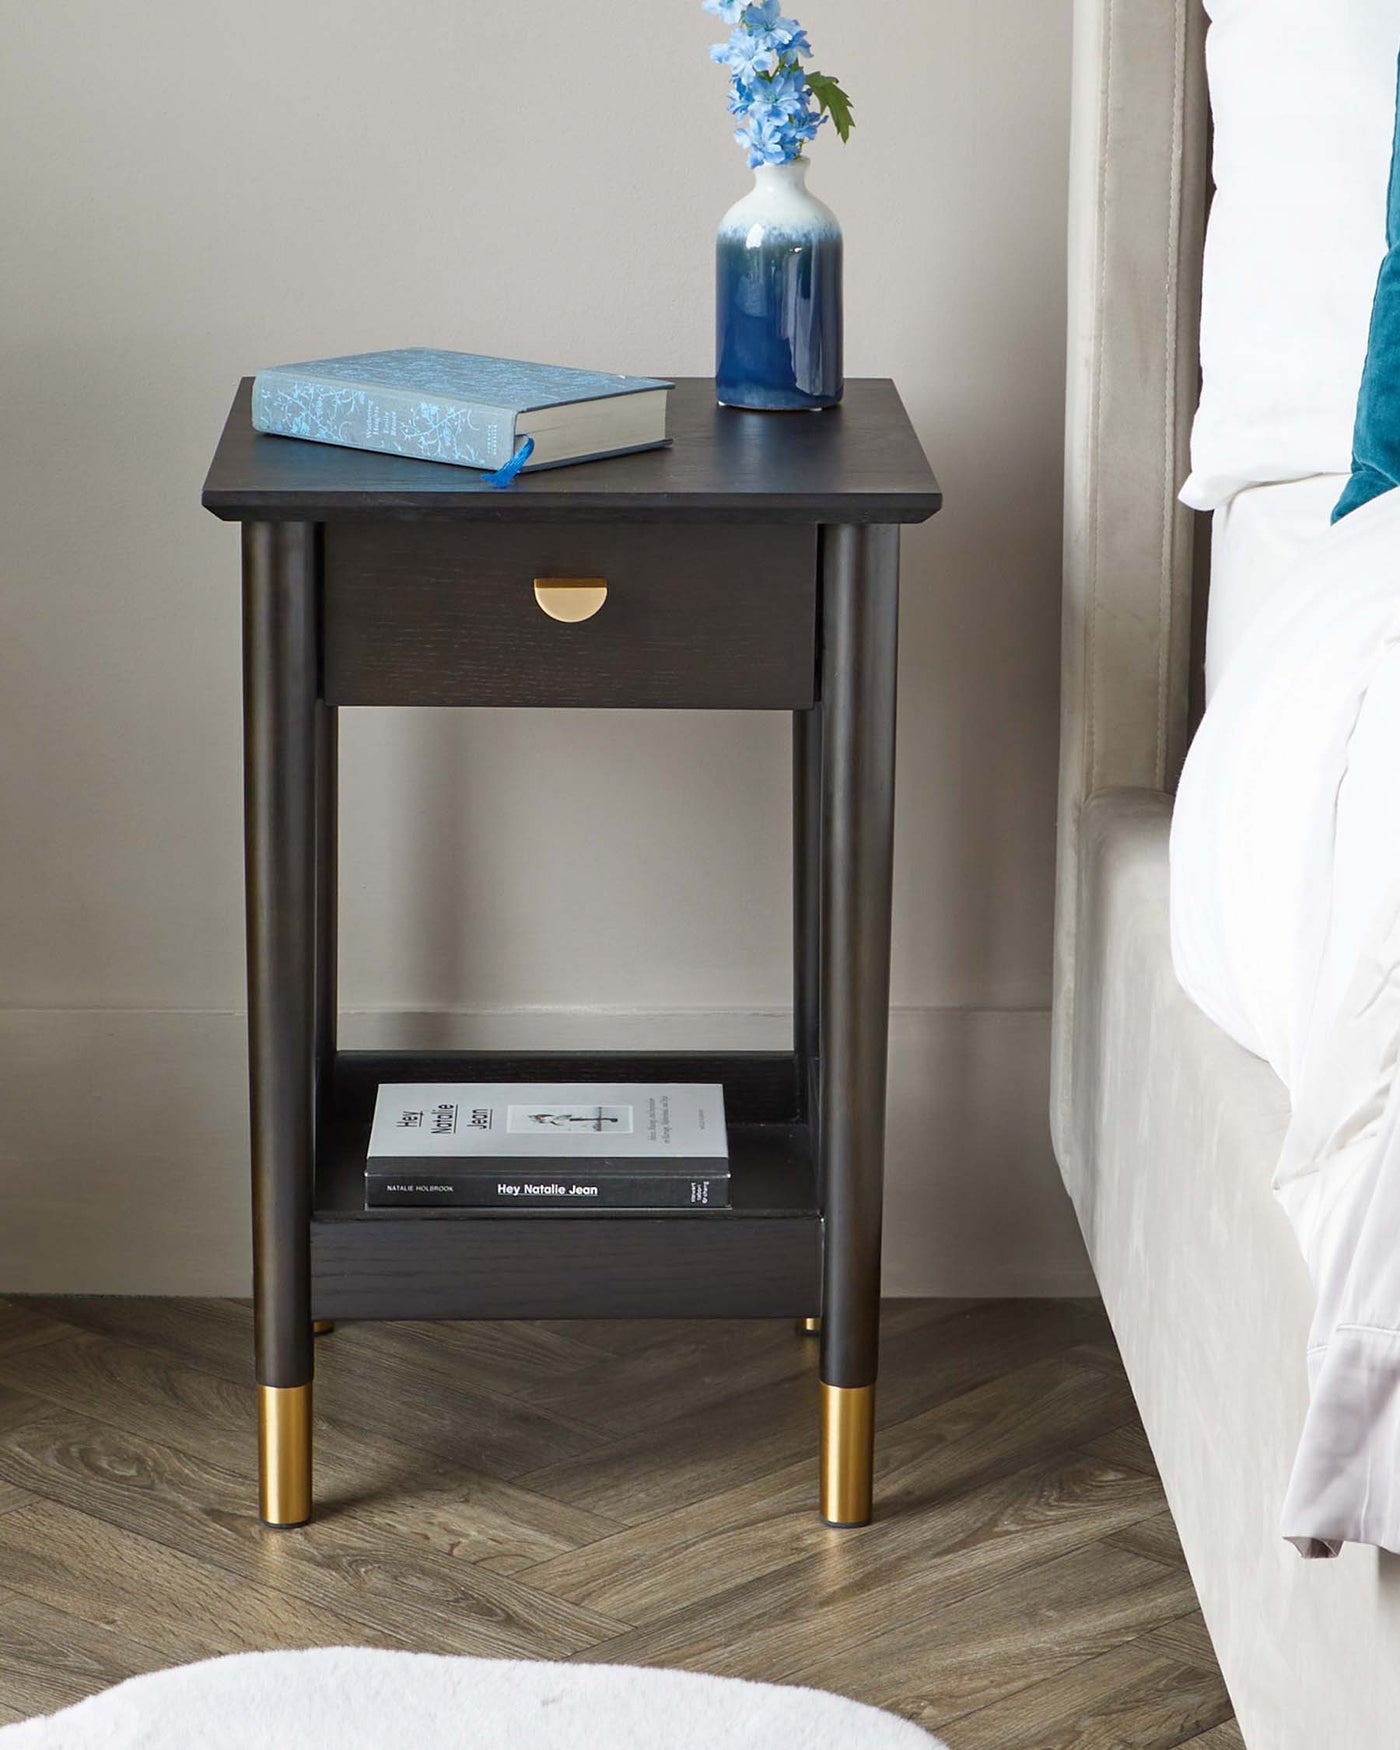 A contemporary espresso-finished nightstand featuring a smooth rectangular top, a pull-out drawer with a brass crescent-shaped pull, and tapered legs with brass caps. The lower shelf offers additional storage space, and the piece is styled with a book and a vase of flowers on top.